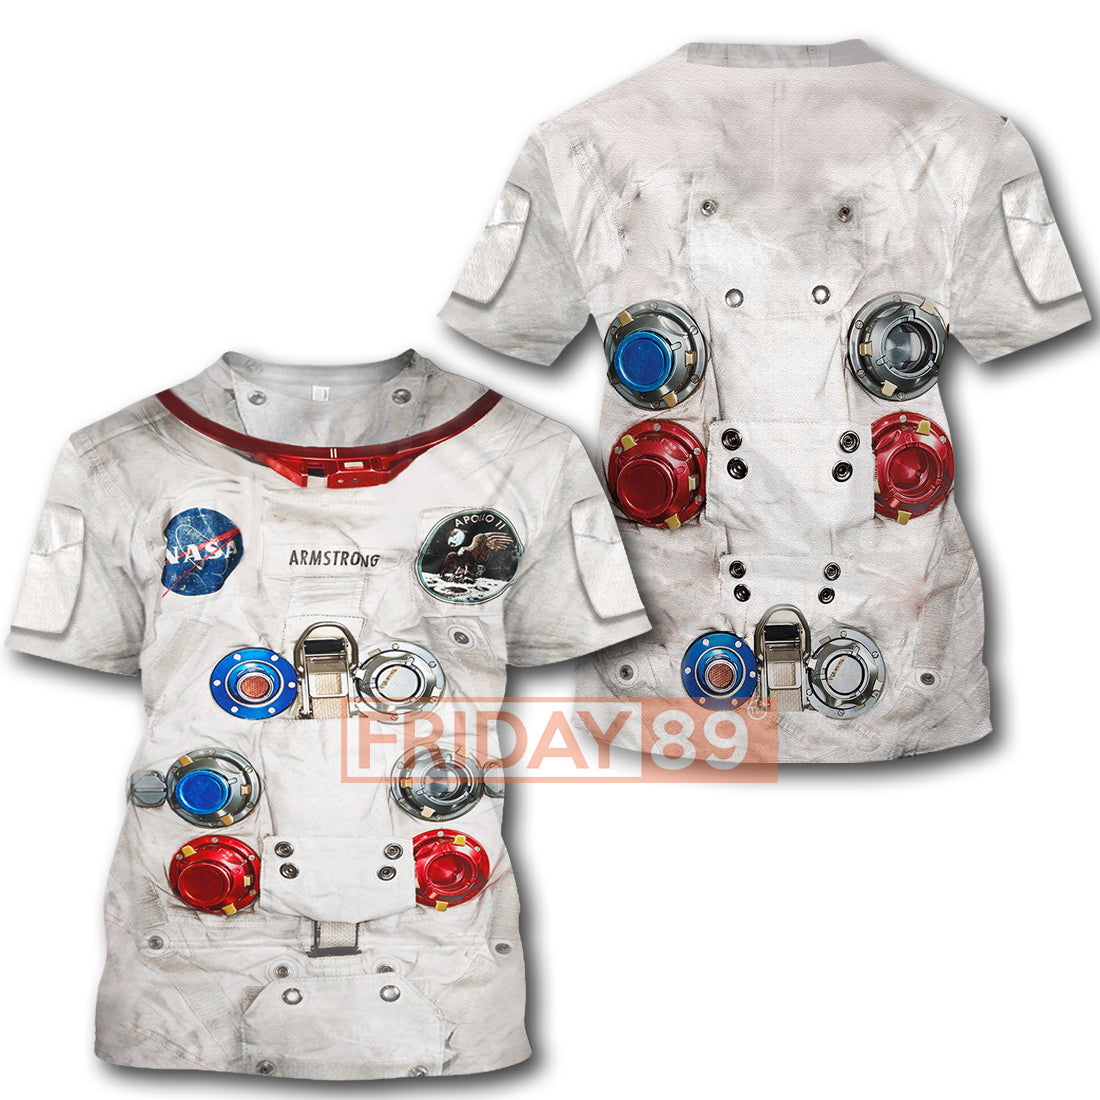 Unifinz Astronaut Suit Hoodies Armstrong Spacesuit Apparel Awesome Astronaut Shirt Sweater 2024